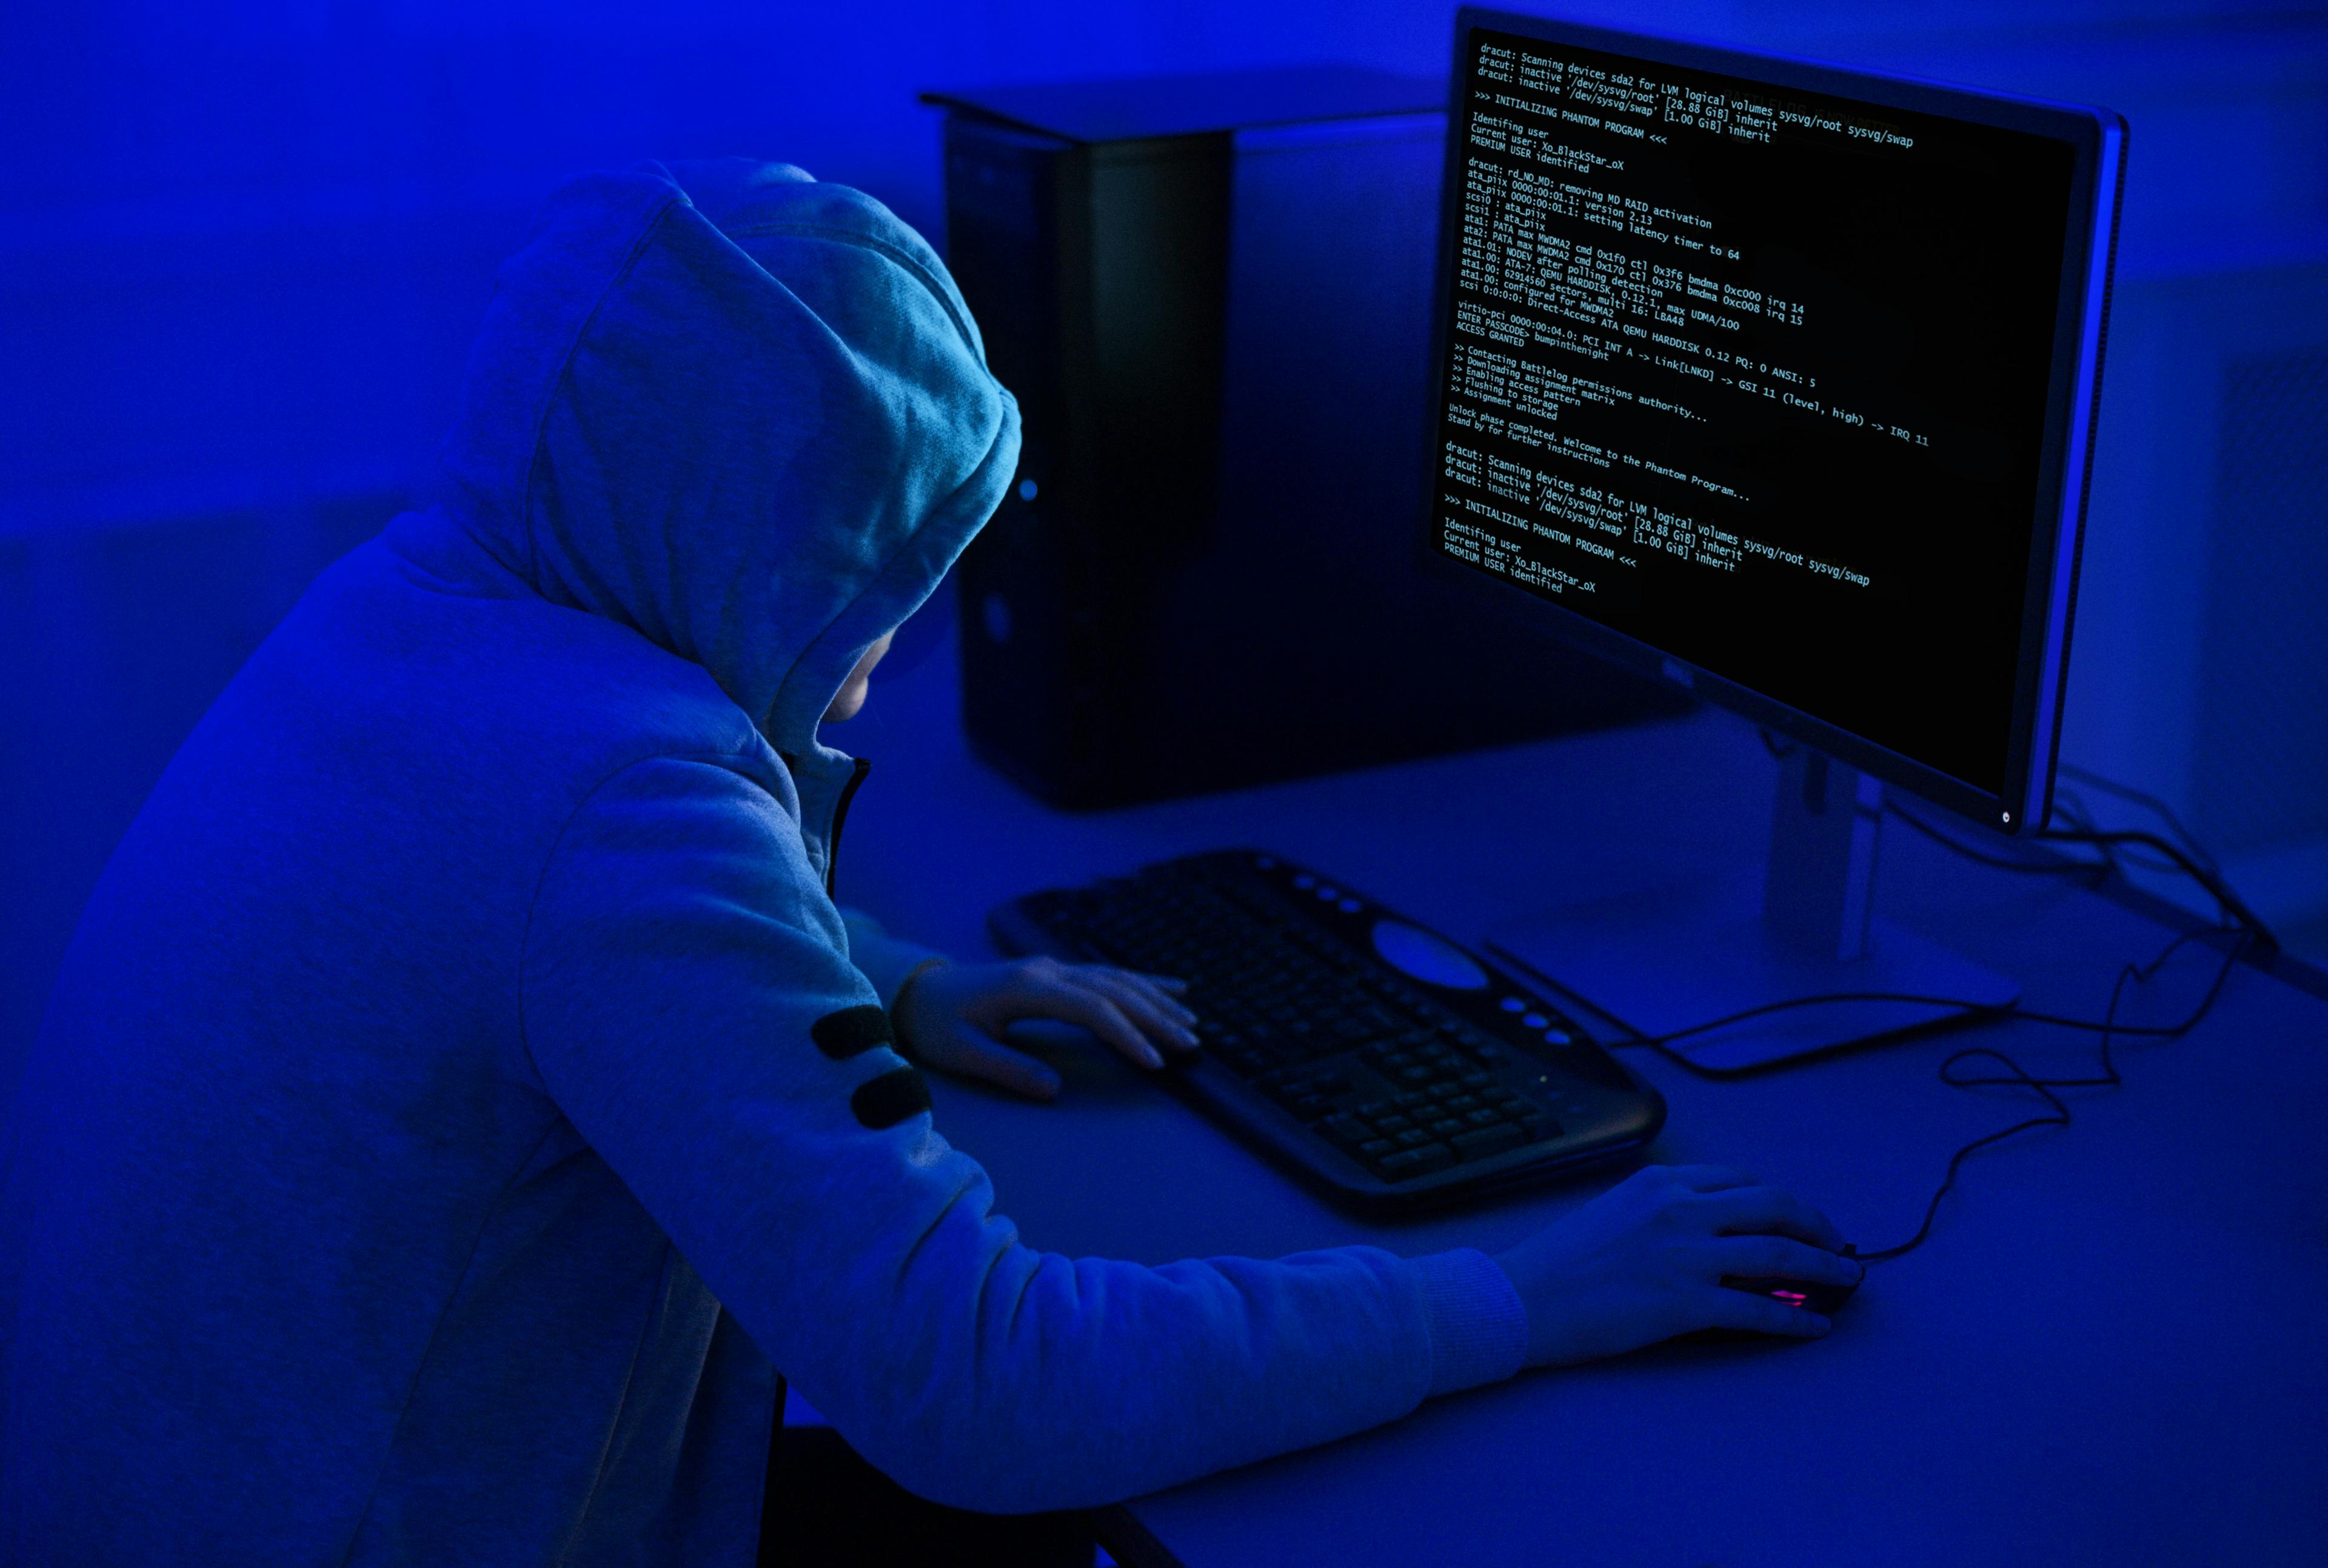 Health care continues to be a hacking target: ©Pro stock studio - stock.adobe.com